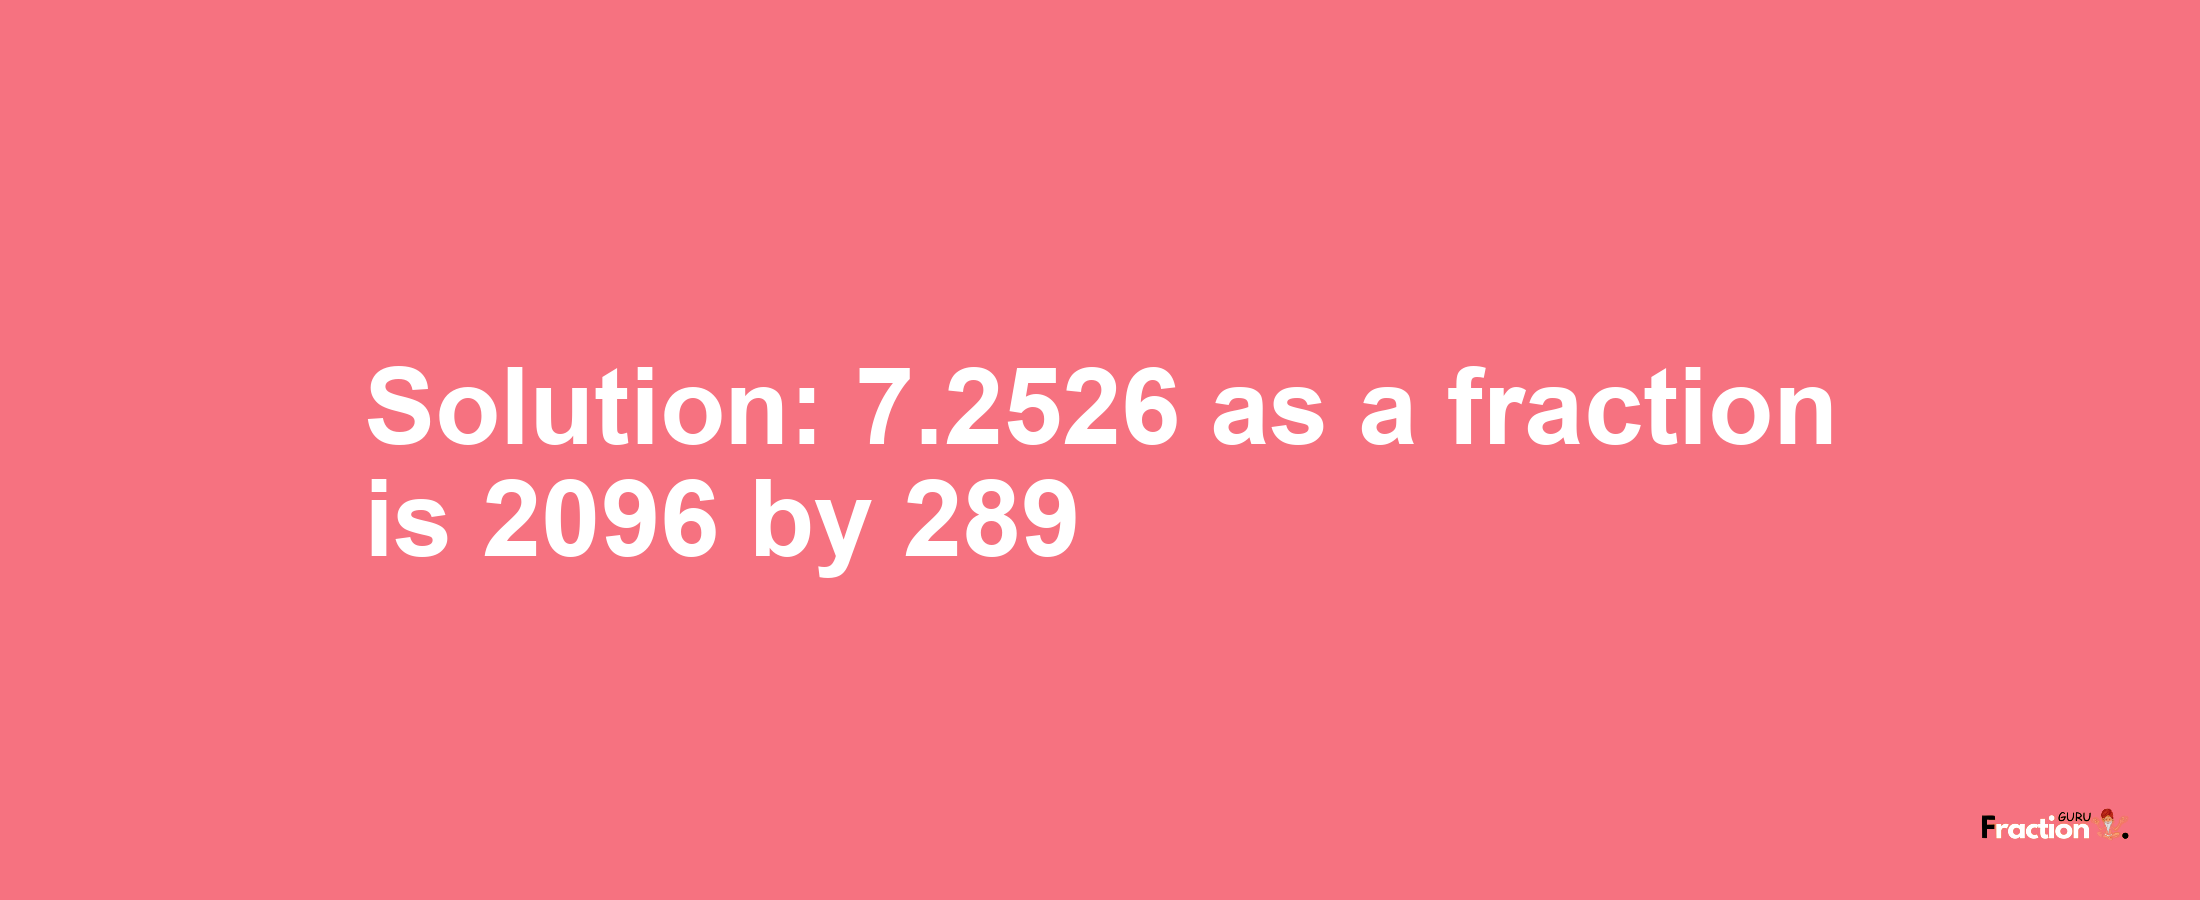 Solution:7.2526 as a fraction is 2096/289